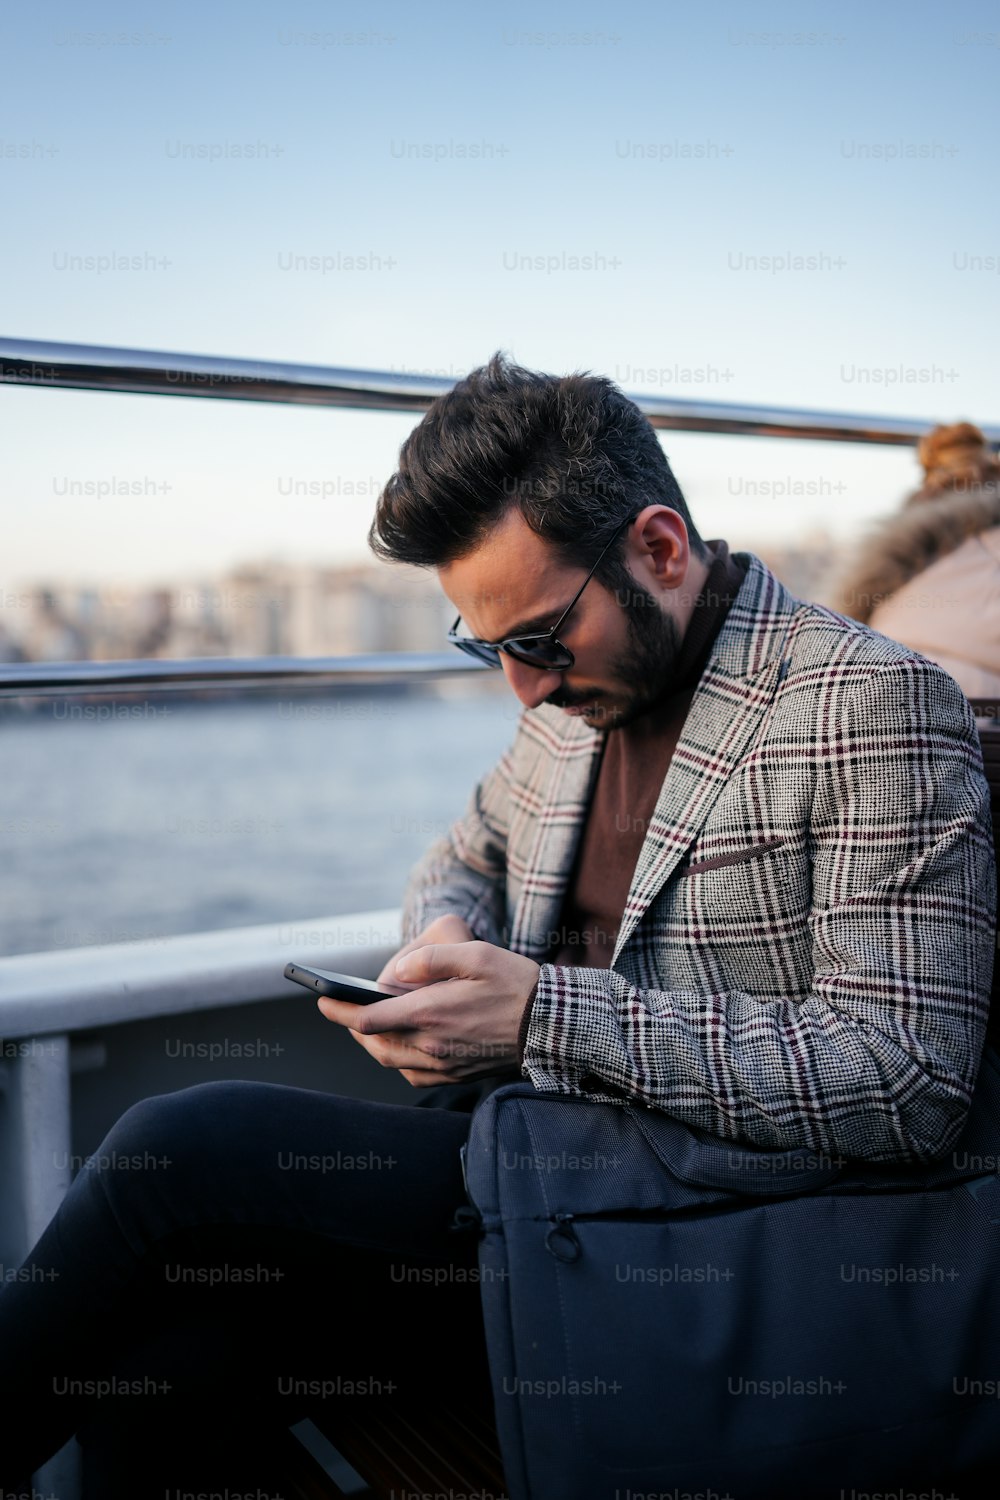 a man sitting on a boat looking at his cell phone